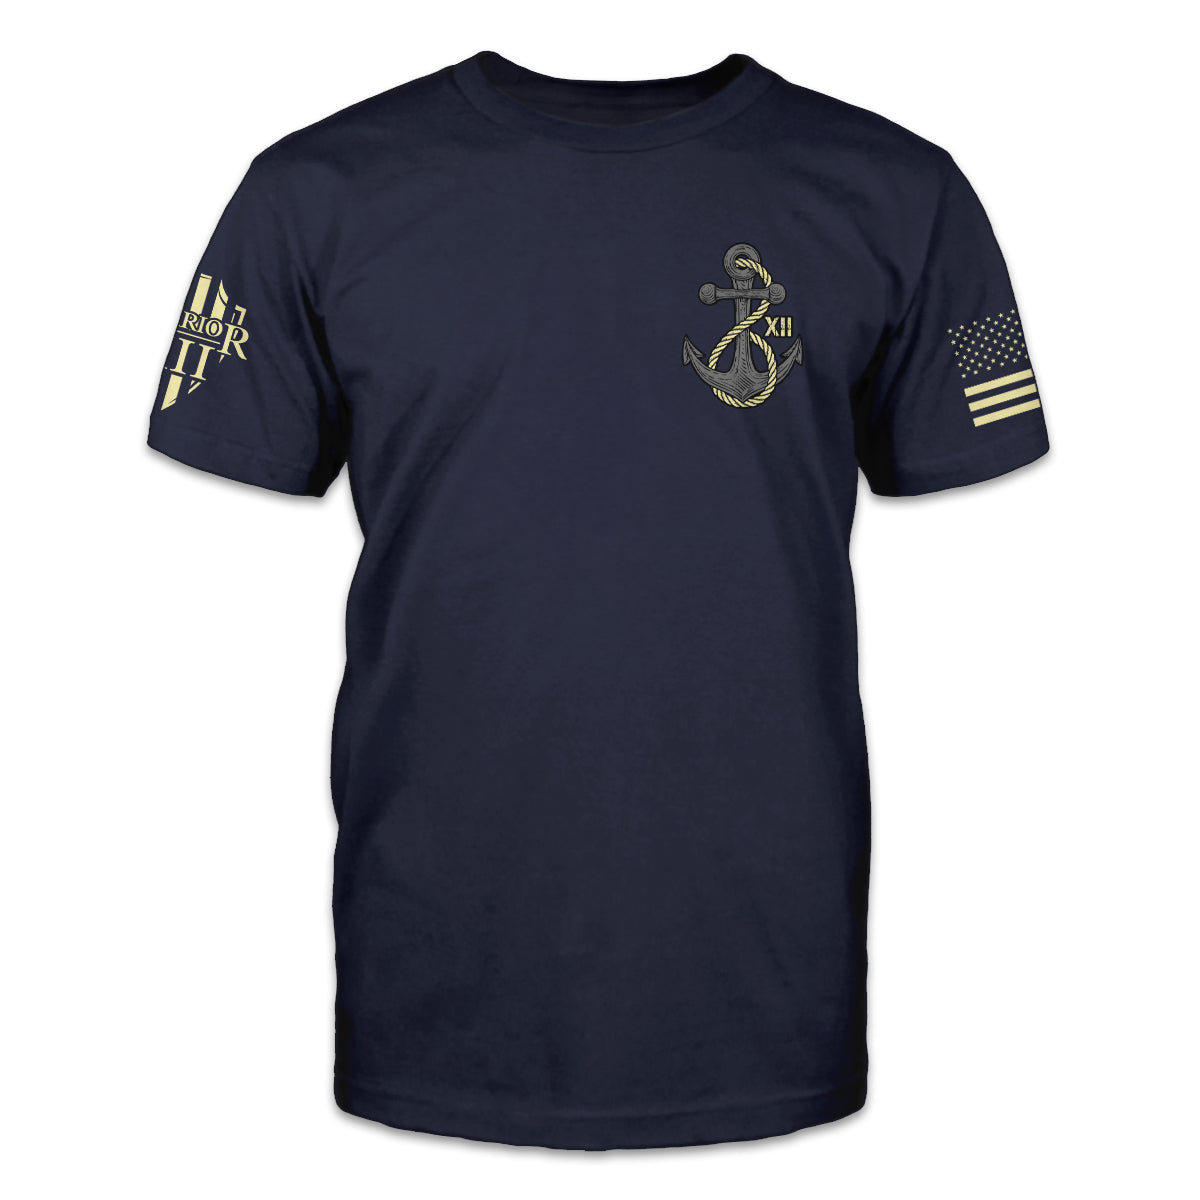 A navy blue t-shirt with an anchor printed on the front of the shirt.